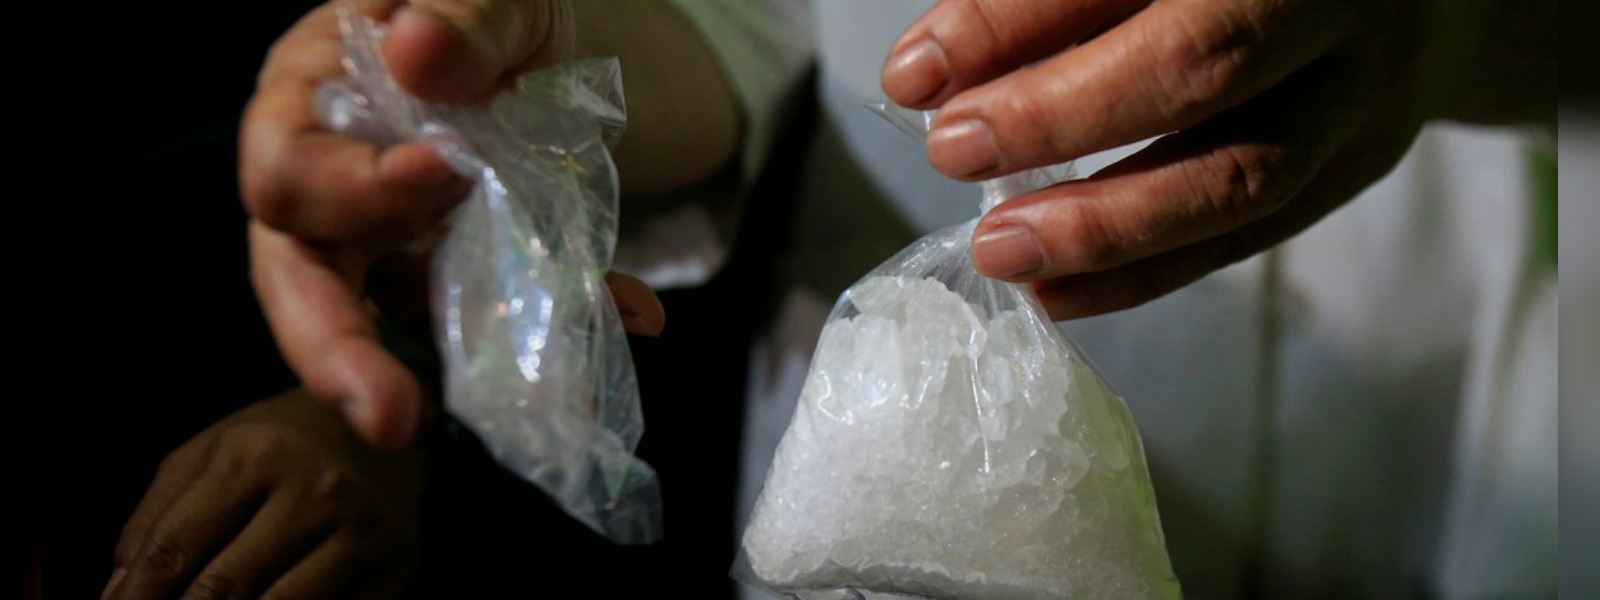 Pilot project launched to crackdown on narcotics 